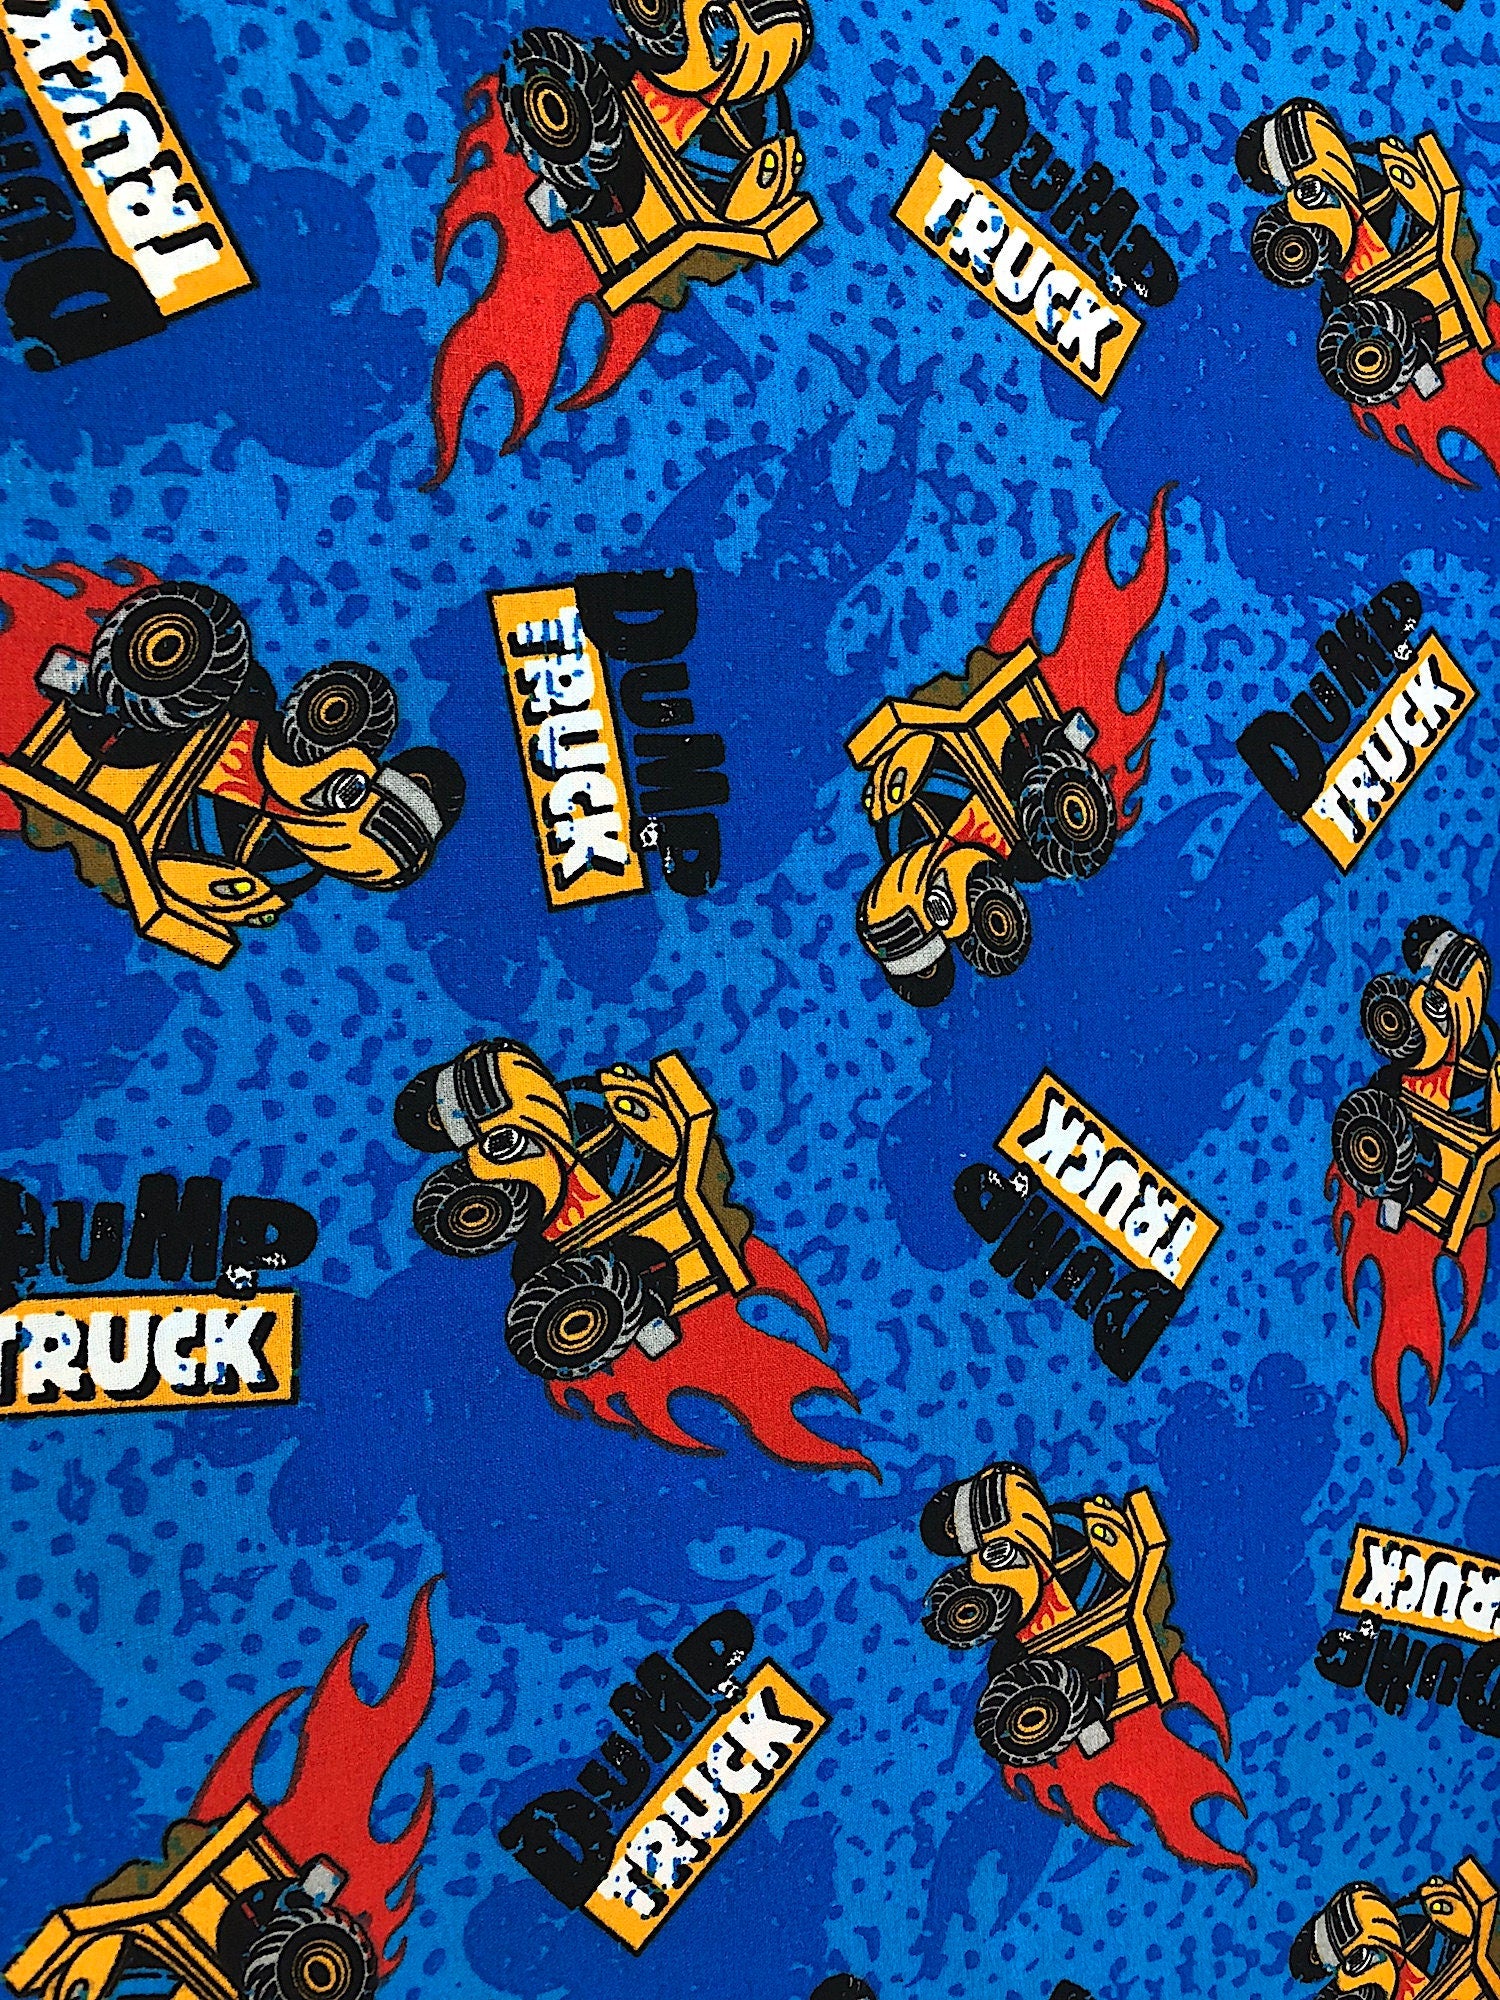 This fabric is called Kids Time Blue and has dump trucks scattered all over a blue background